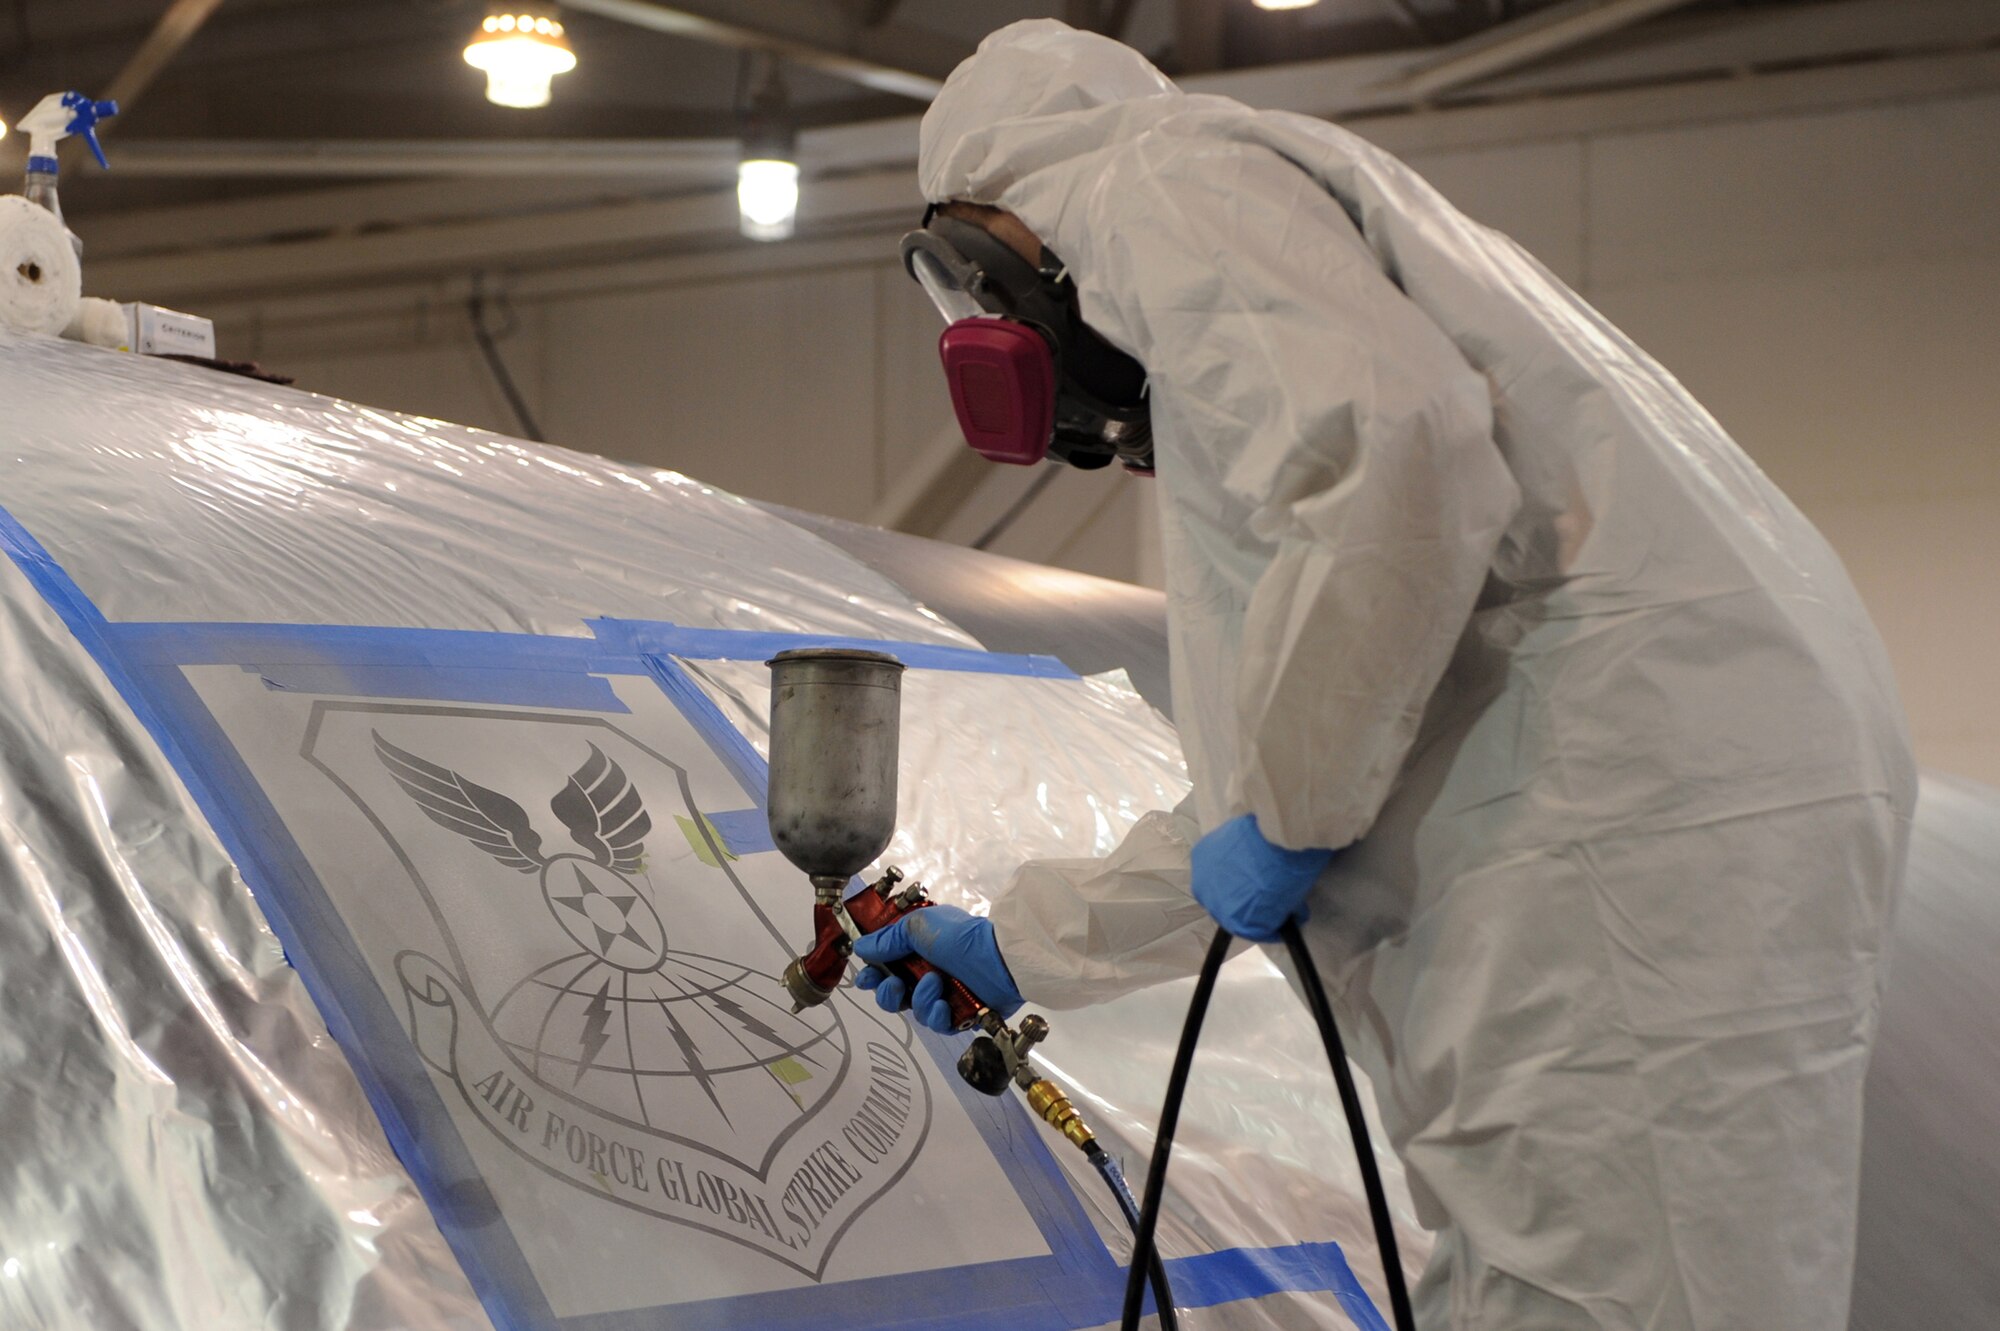 WHITEMAN AIR FORCE BASE, Mo. -Airman 1st Class Kyle Miller, 509th Maintenance Squadron structural maintenance technician, sprays on the new Air Force Global Strike Command patch onto a B-2 Spirit in preparation for Whiteman's transfer of commands, Jan. 25, 2010. On Feb. 1, 2010, Whiteman AFB and its arsenal of 20 B-2 bombers will change commands from Air Combat Command to AFGSC. The mission of AFGSC is to "develop and provide combat-ready forces for nuclear deterrence and global strike operations -- safe -- secure -- credible to support the President of the United States and combatant commanders." (U.S. Air Force photo by Airman 1st Class Carlin Leslie) (Released)





